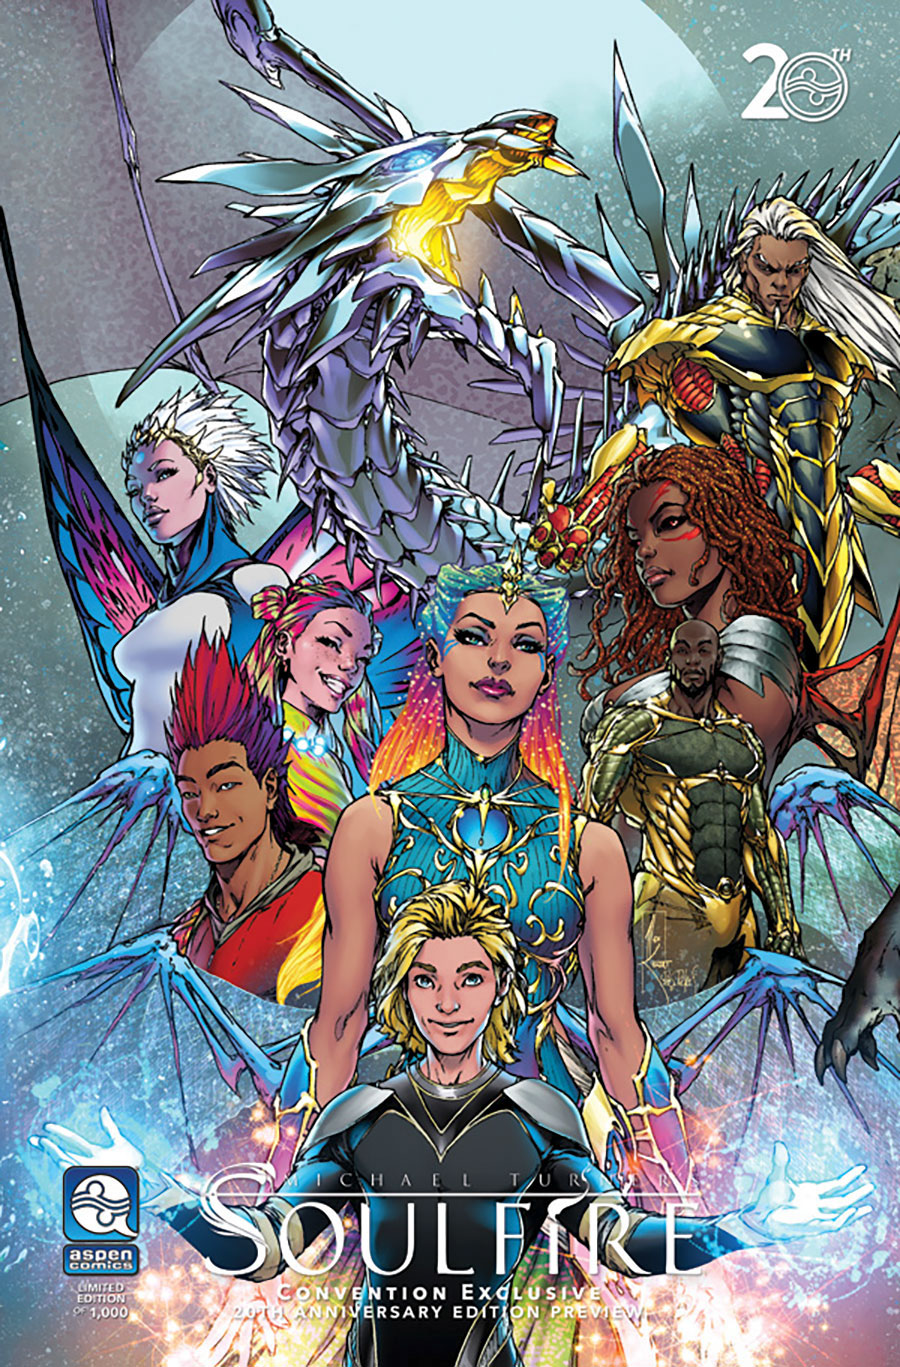 Soulfire Preview 20th Anniversary Convention Exclusive Edition